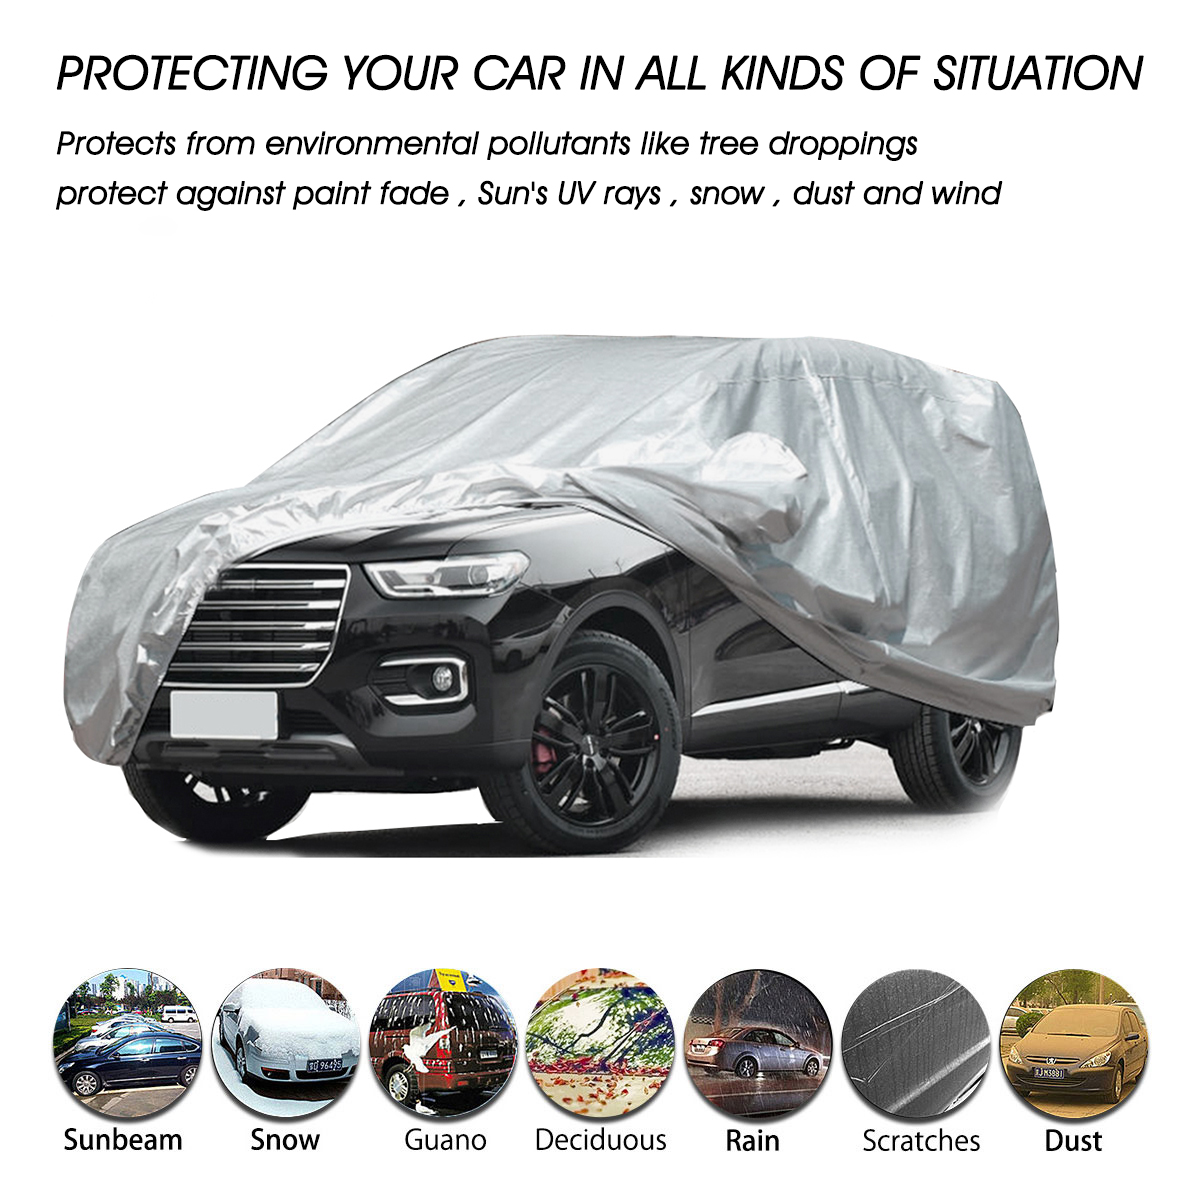 170T SUV Full Car Cover Rain Snow UV Protection Outdoor WaterProof Breathable